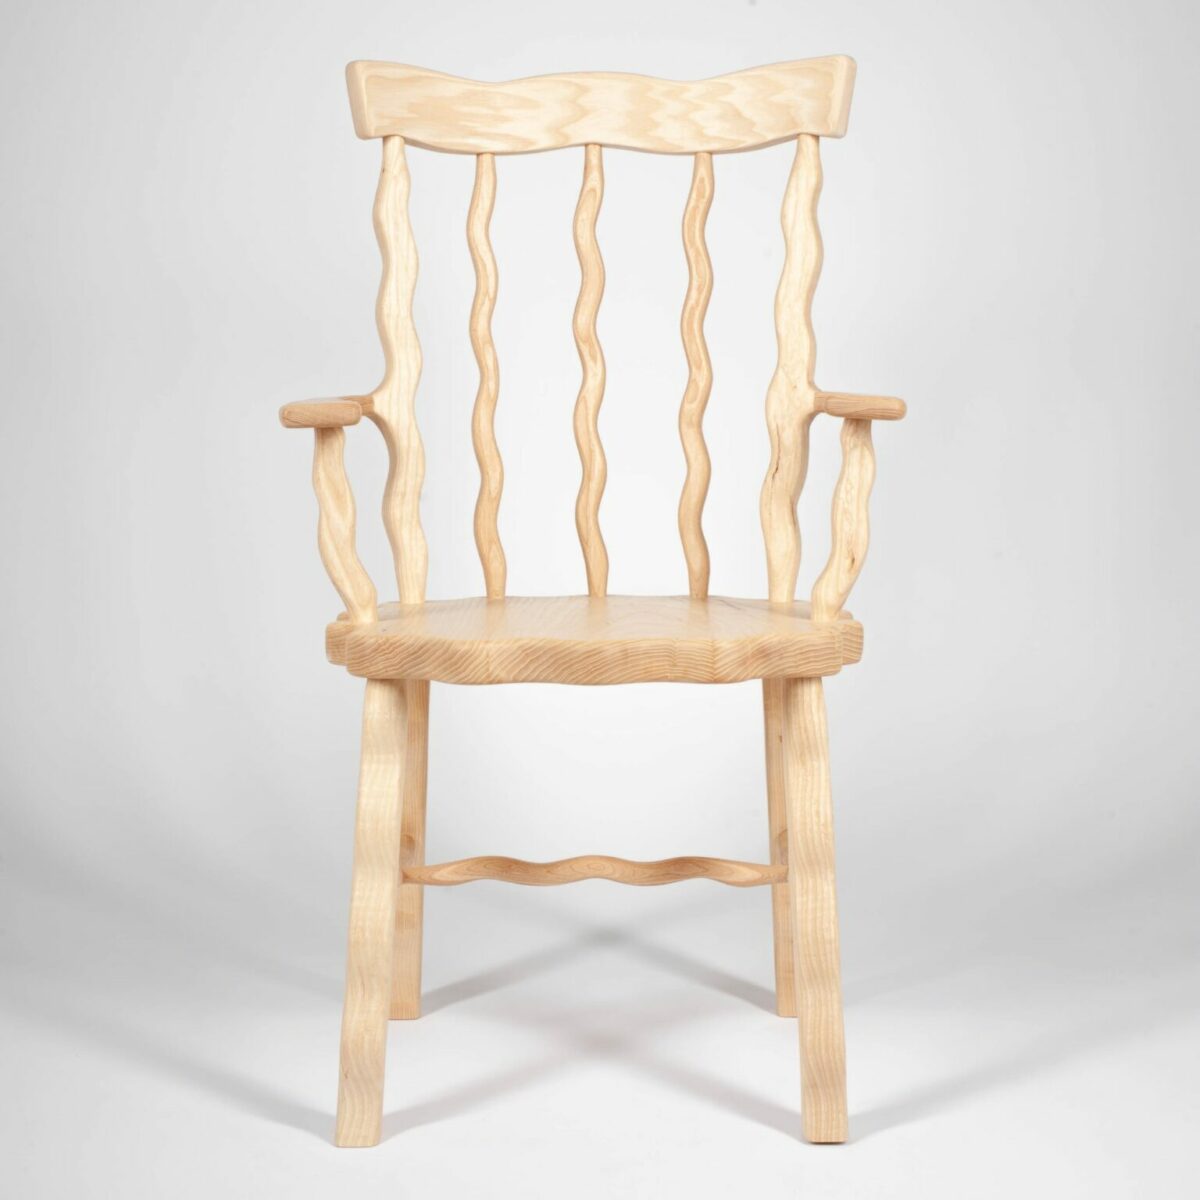 Nervous Chairs Amusing Furniture By Wilkinson Rivera 7